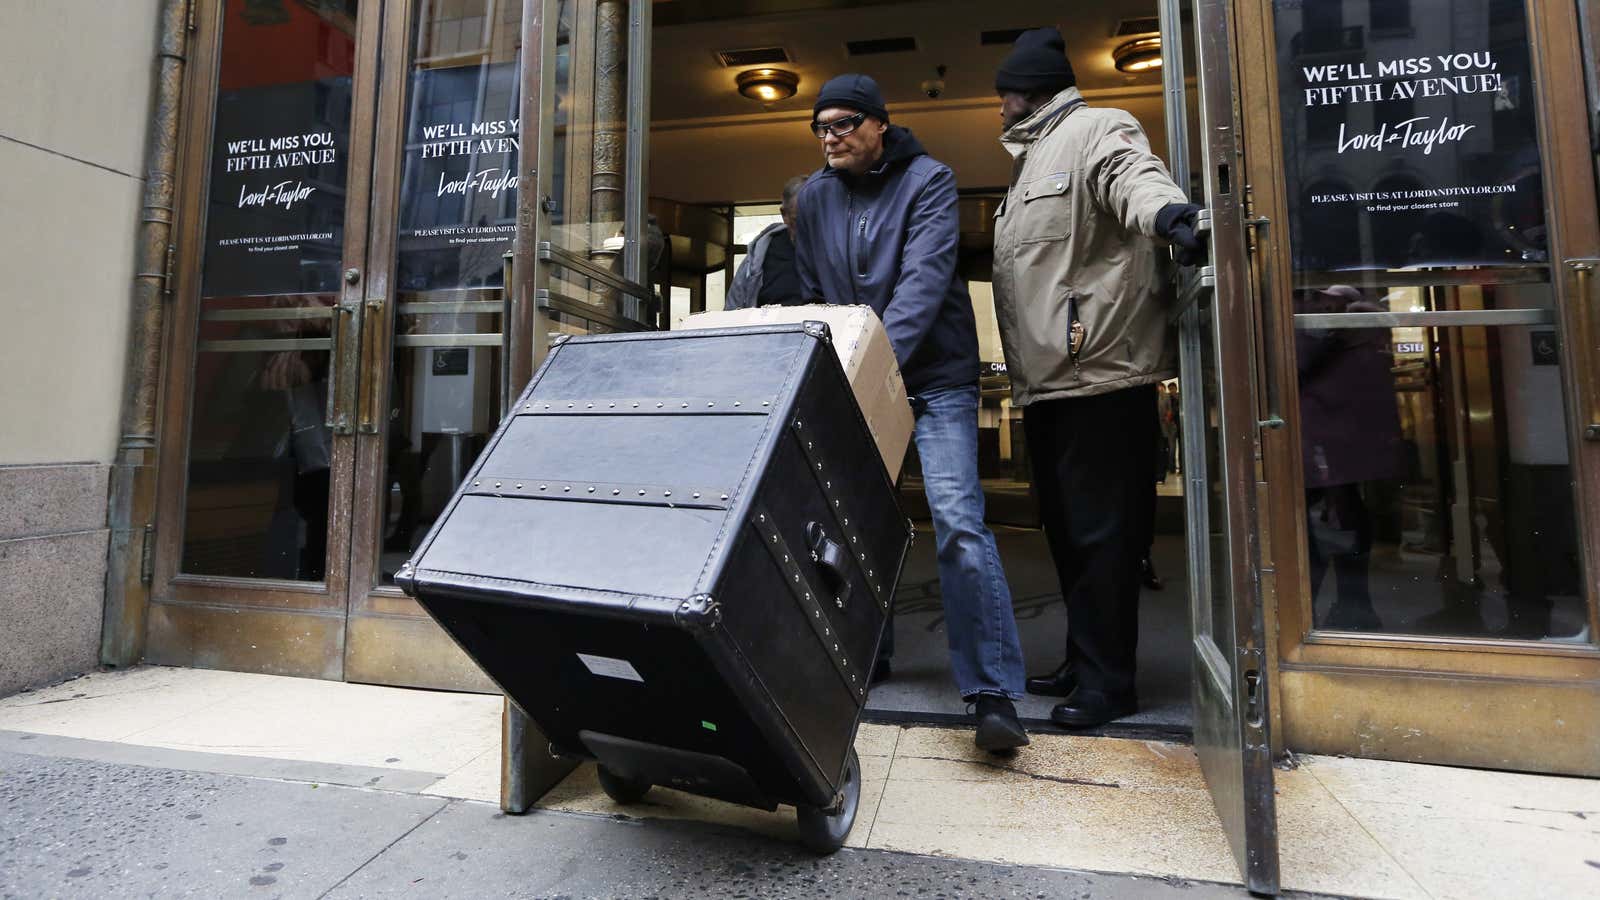 A downturn could mean moving day for many WeWork tenants.